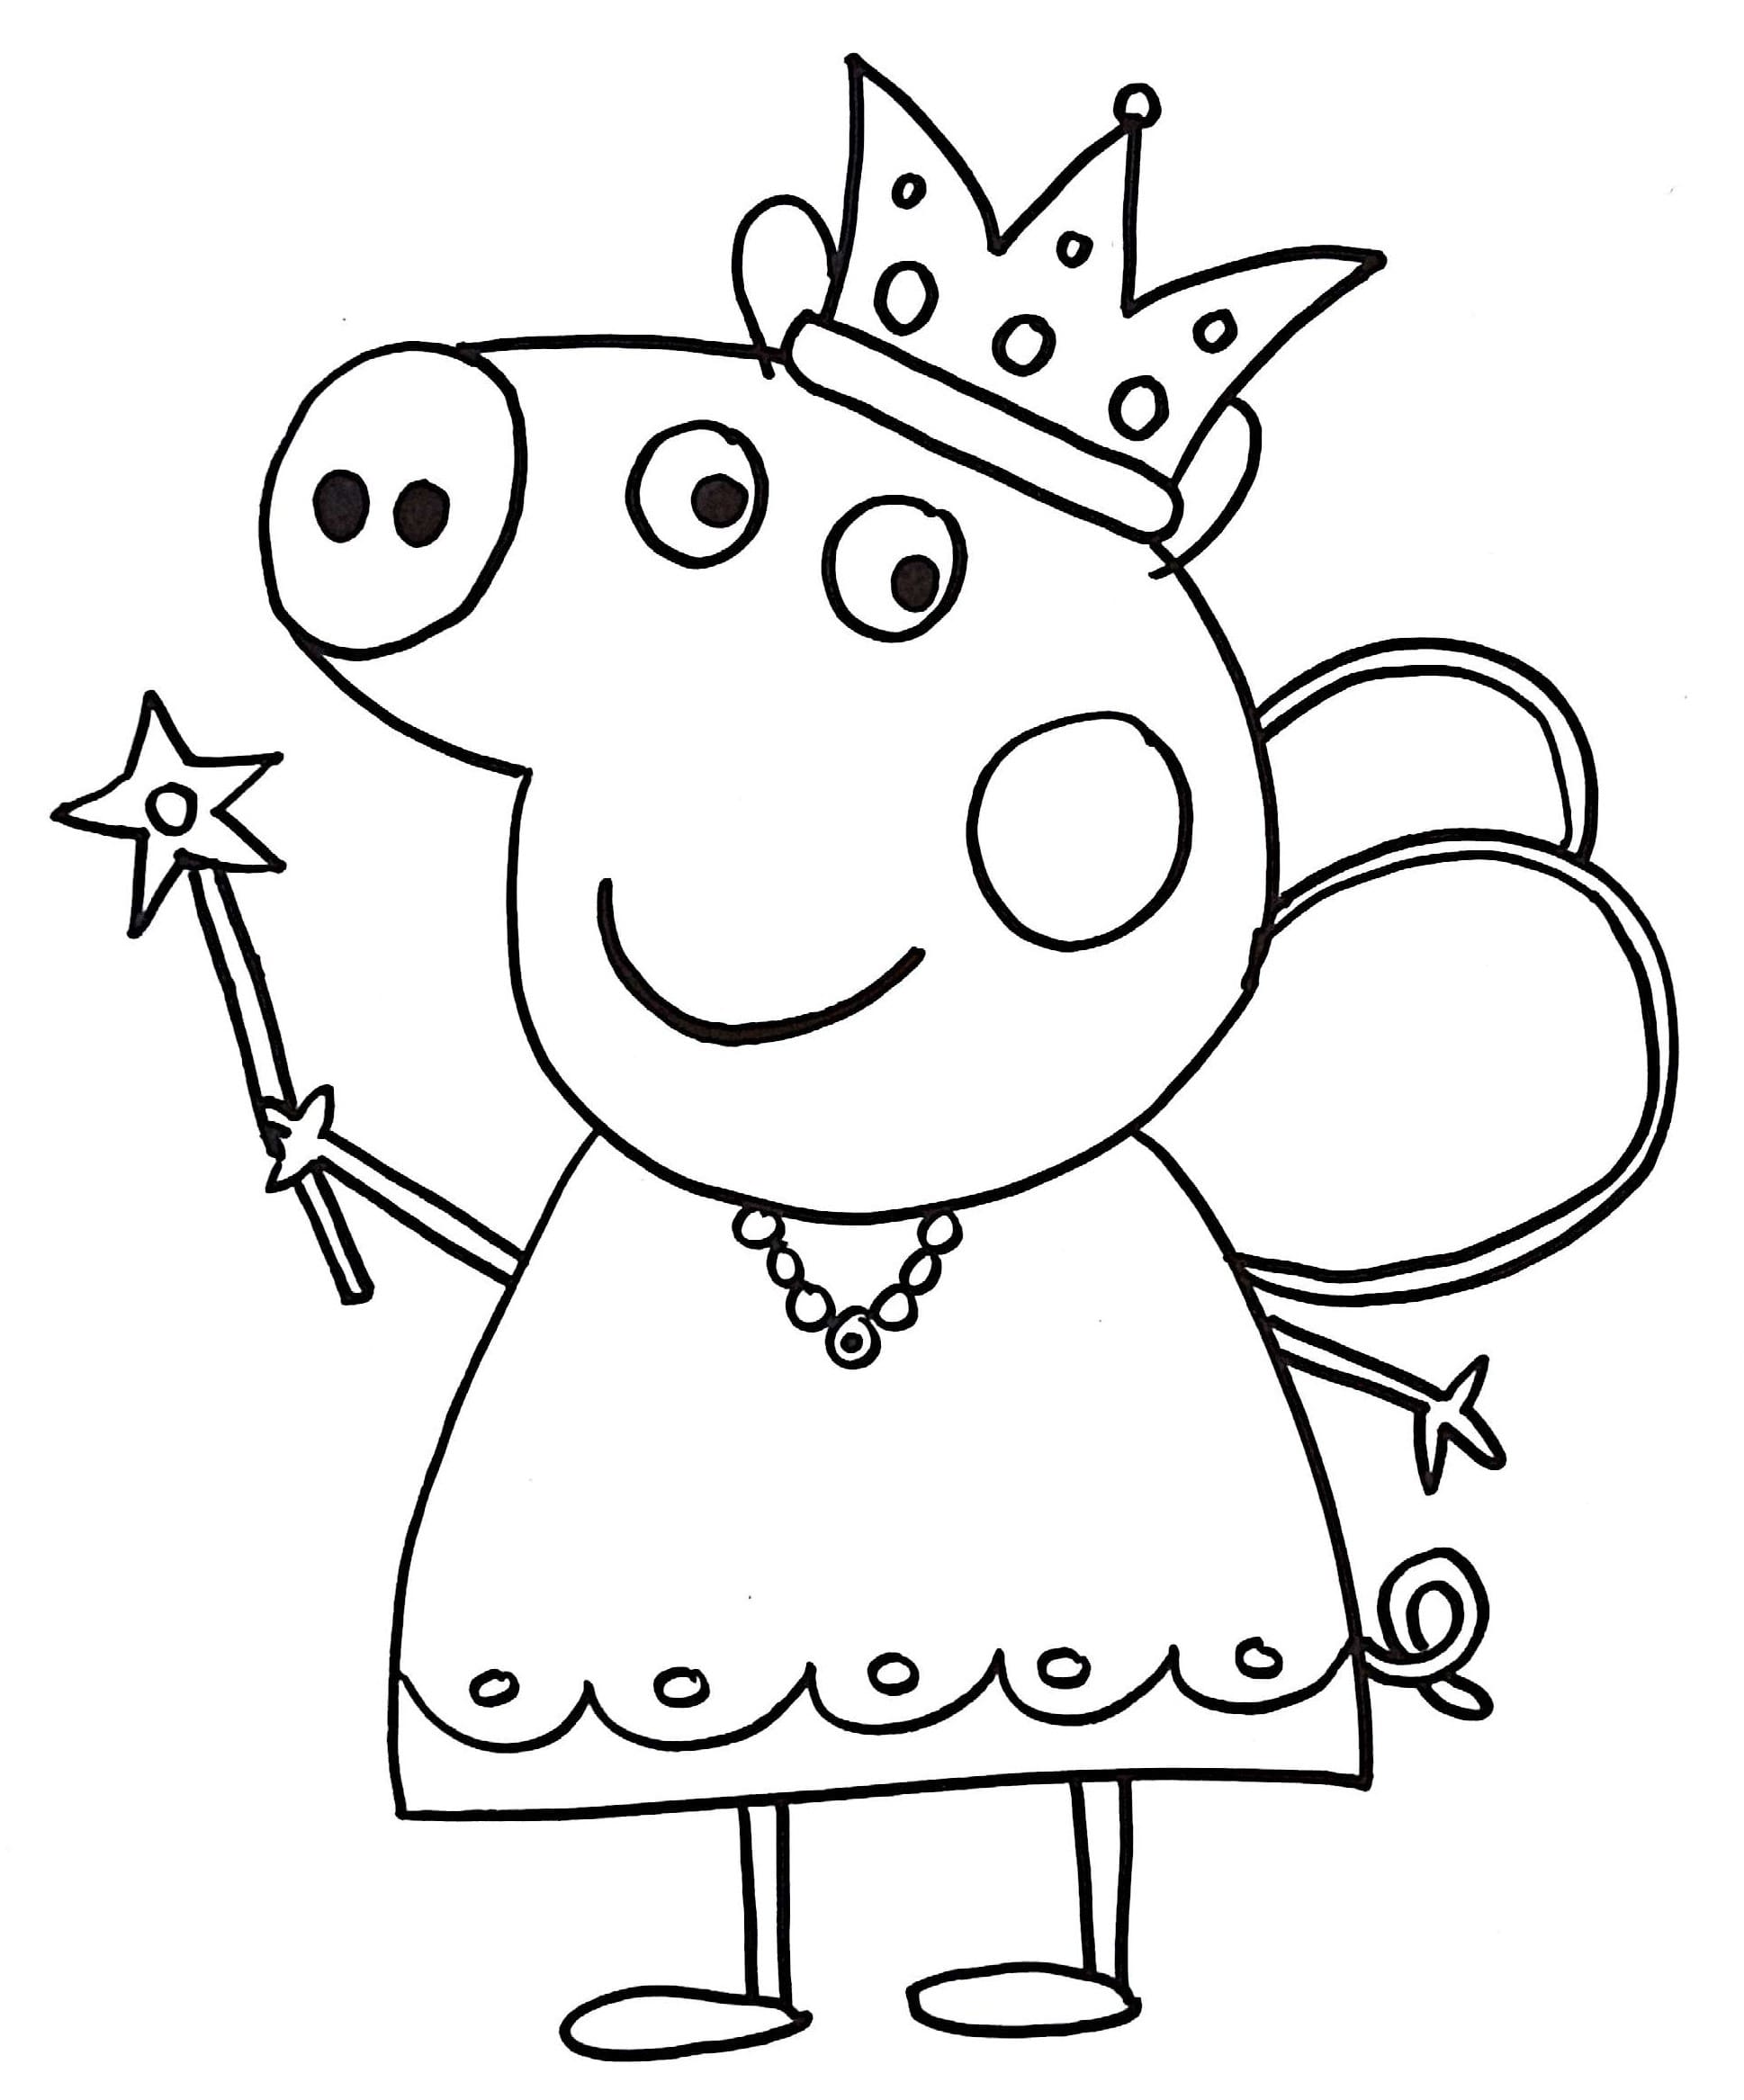 Peppa Pig Coloring Pages. Her Family And Friends. Print Online ...